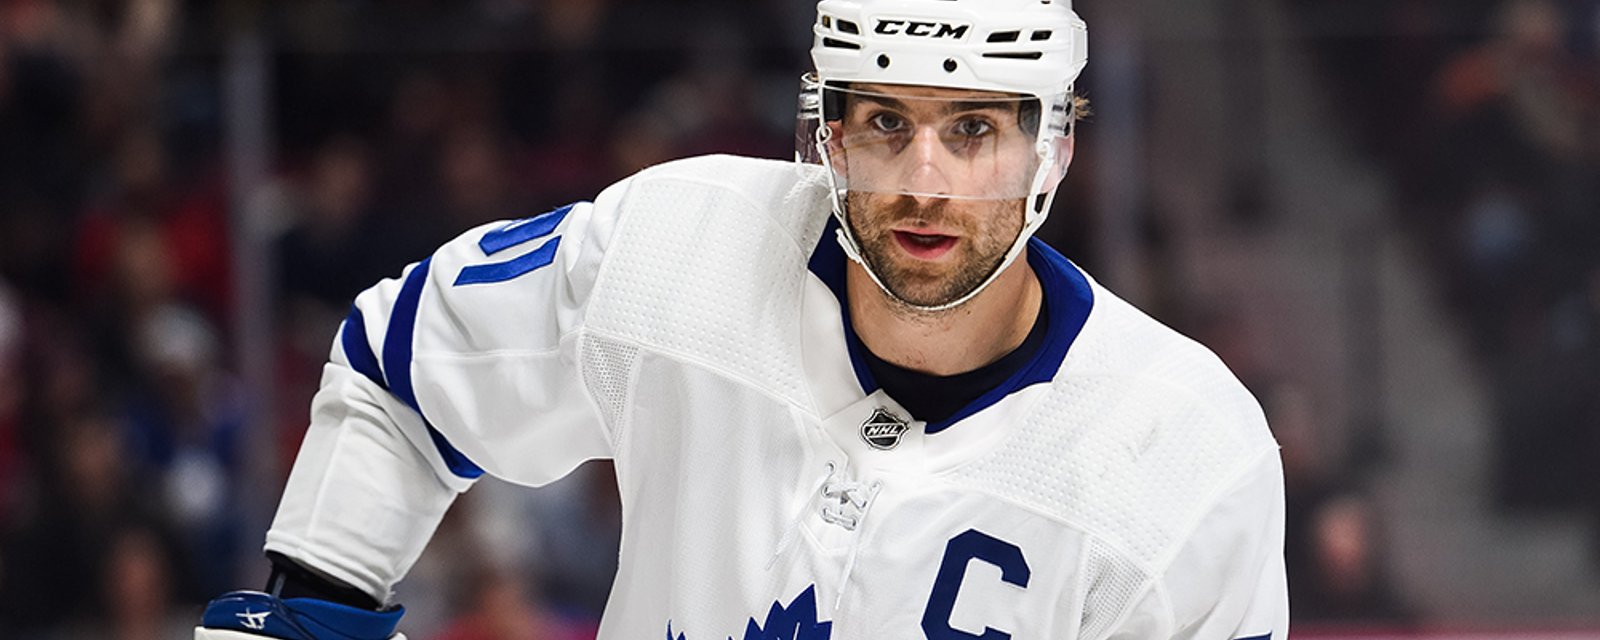 John Tavares shows his appreciation for frontline healthcare workers in Canada